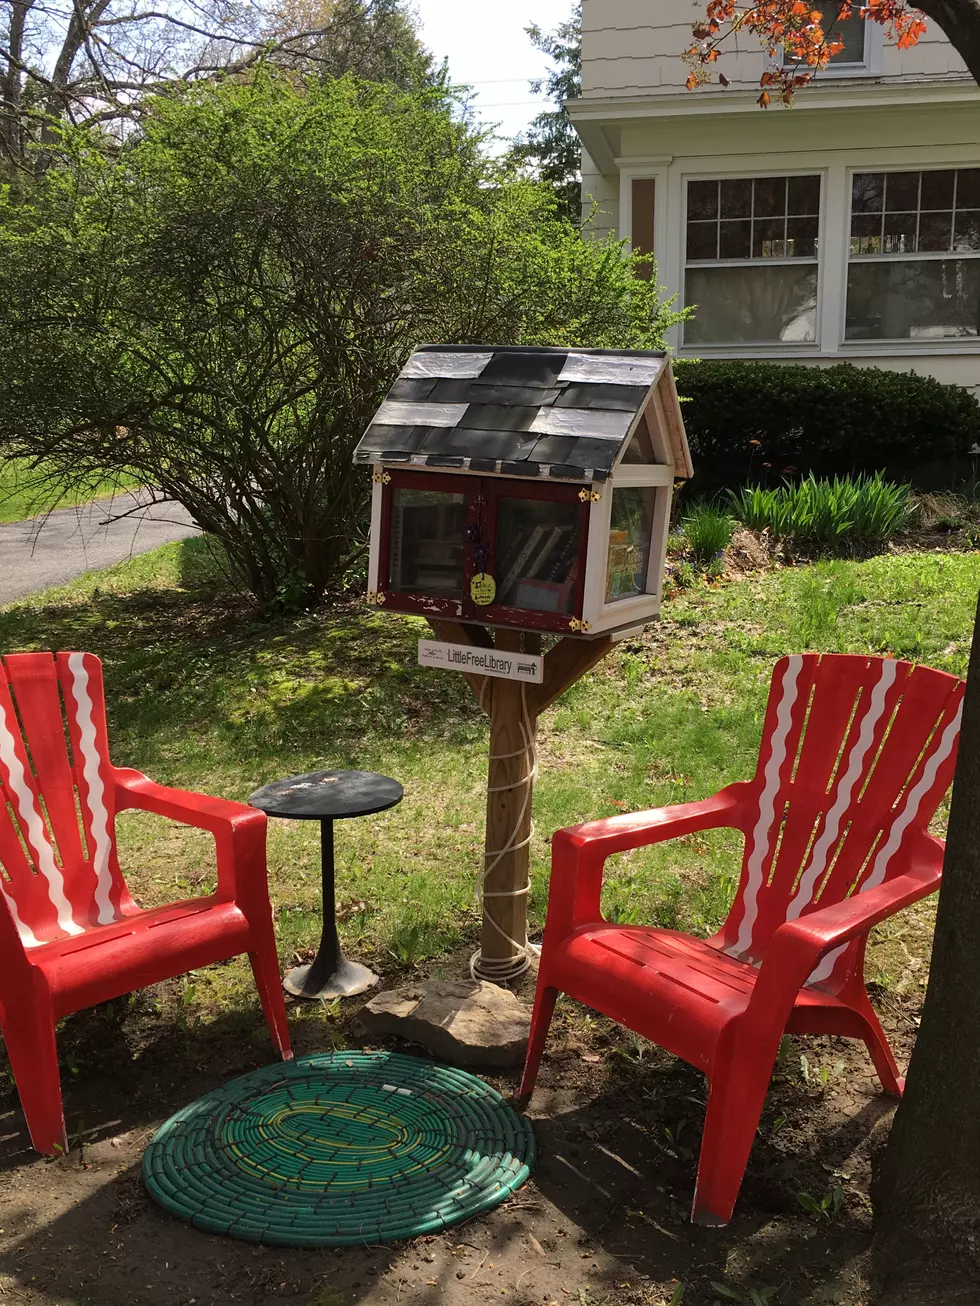 Little Free Library: Take a Book, Return a Book [PHOTO]